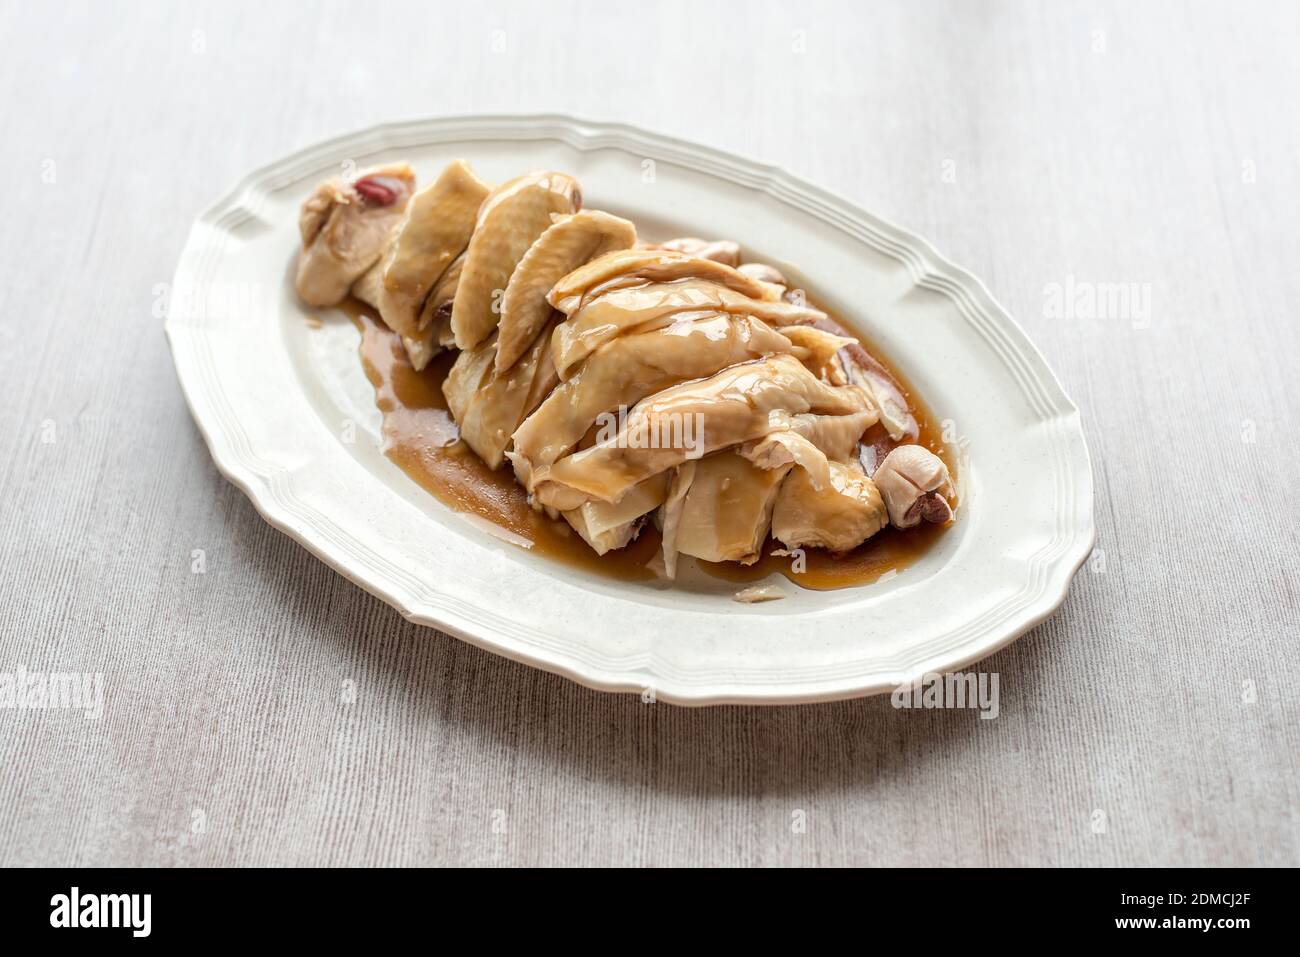 High Angle View Of Food In Plate On Table Stock Photo